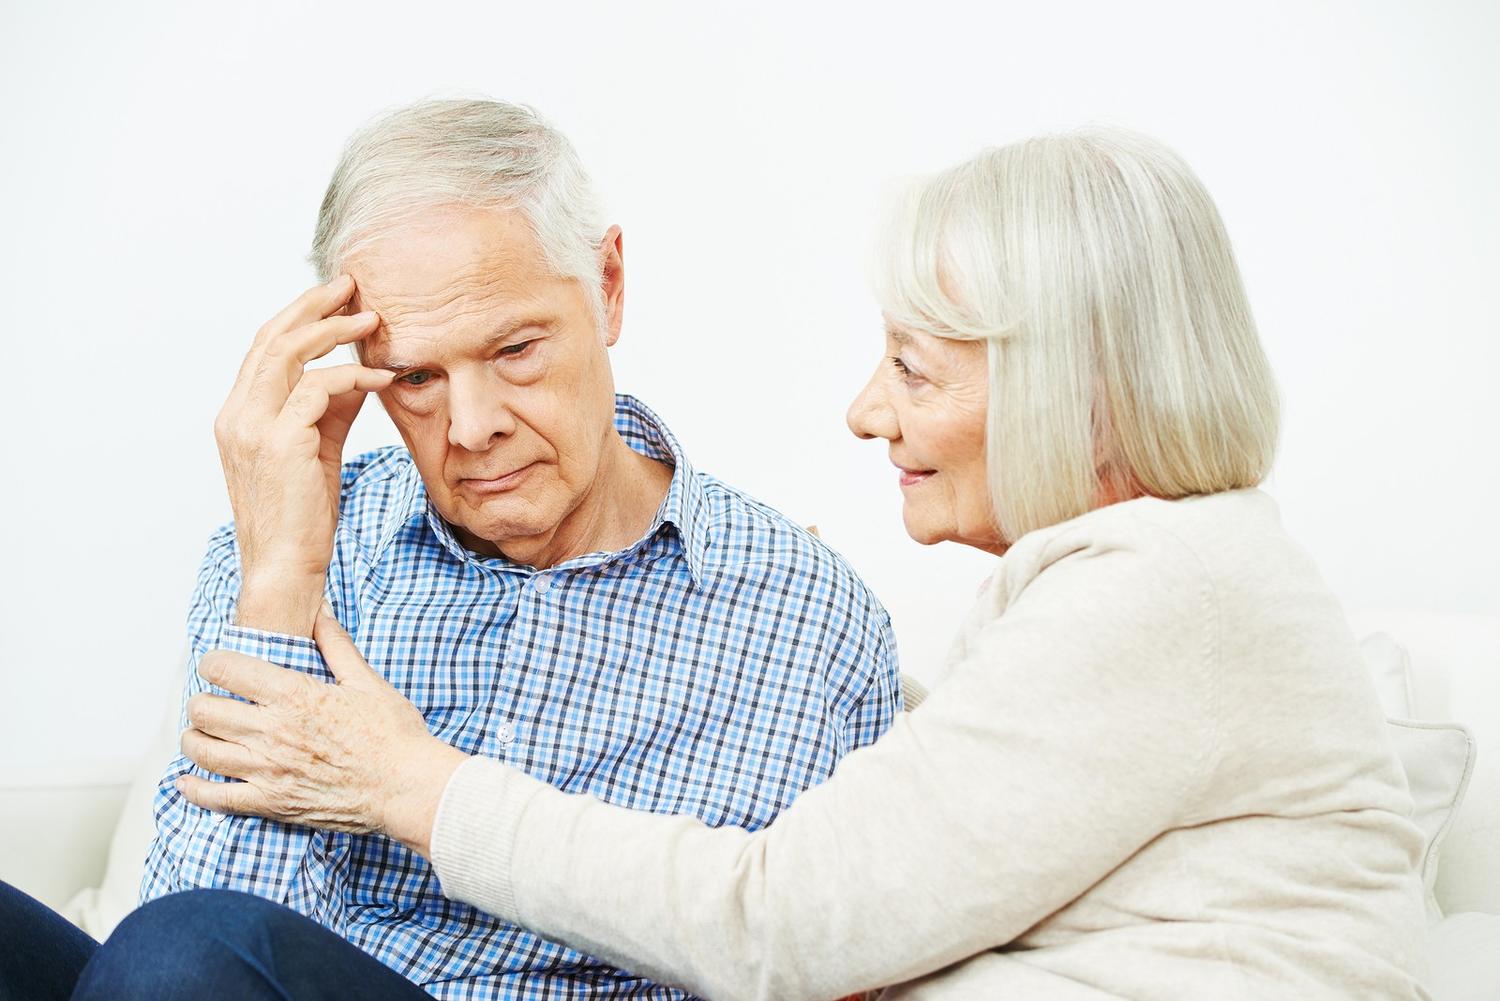 Old woman comforting senior man with depression at home